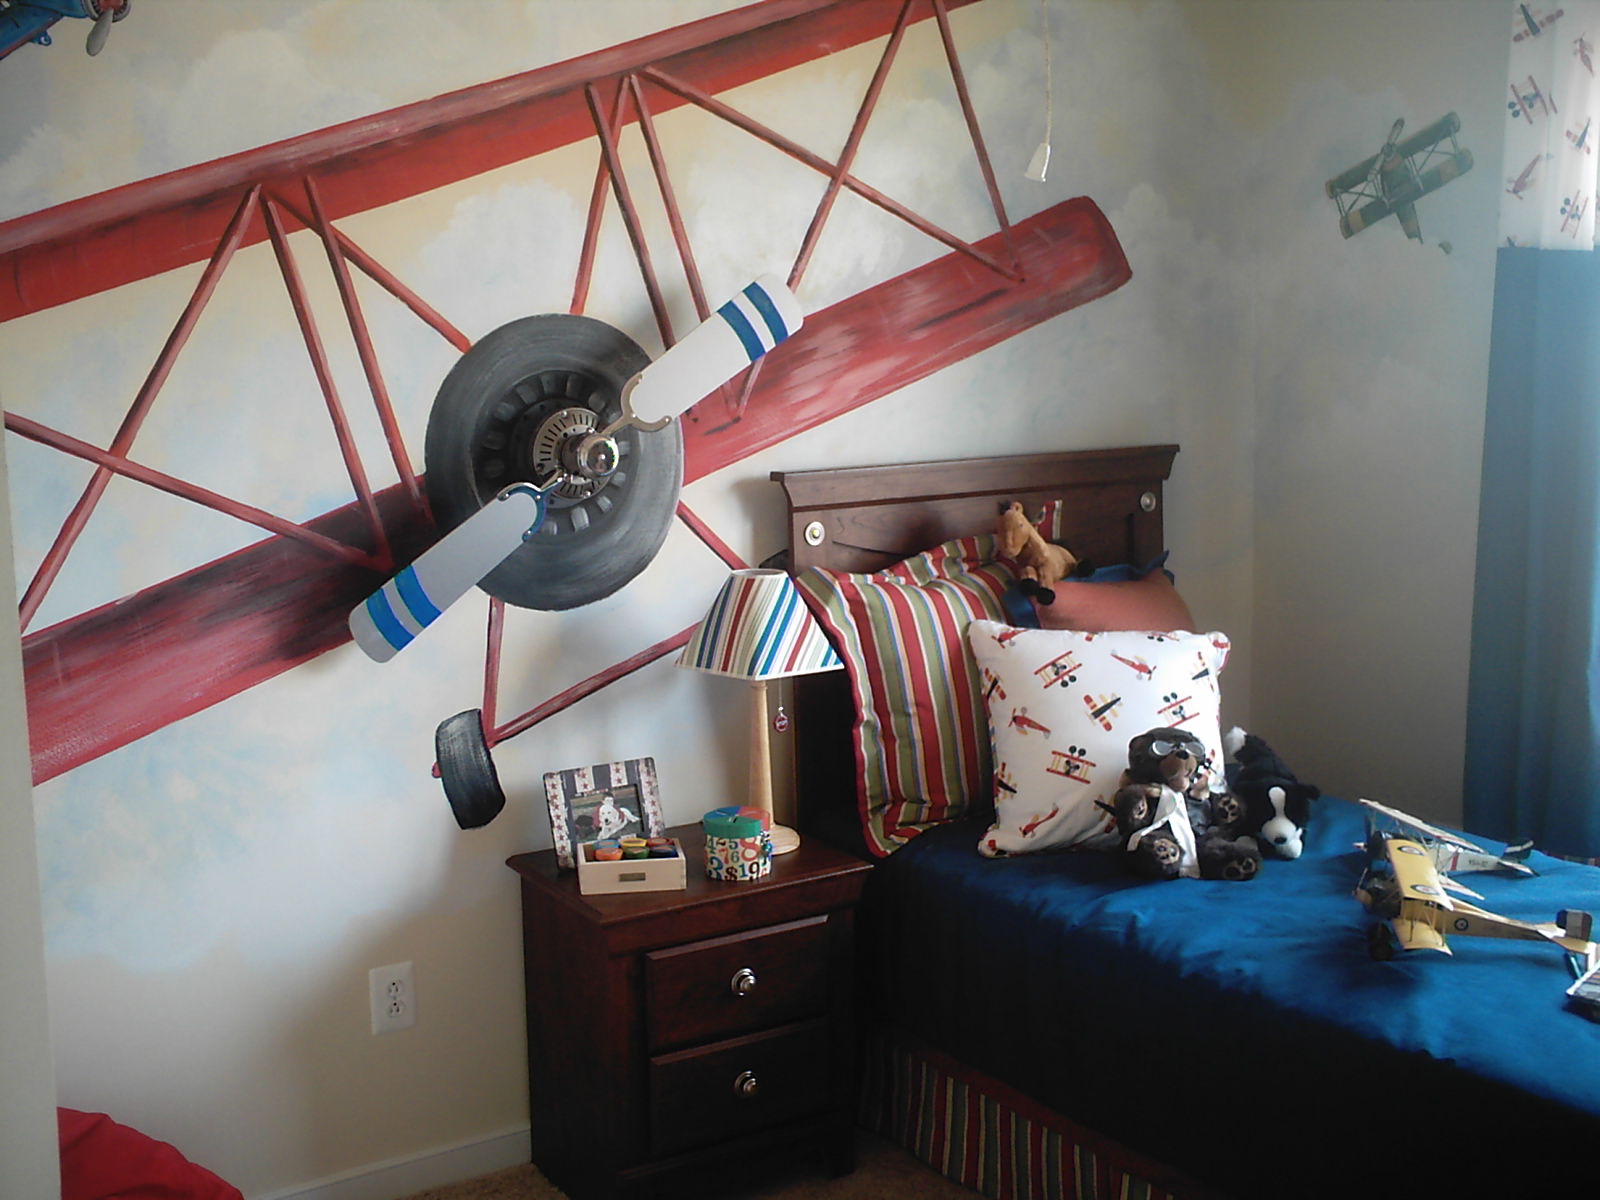 ... room, maybe I should have my own boys airplane room. I love the blue